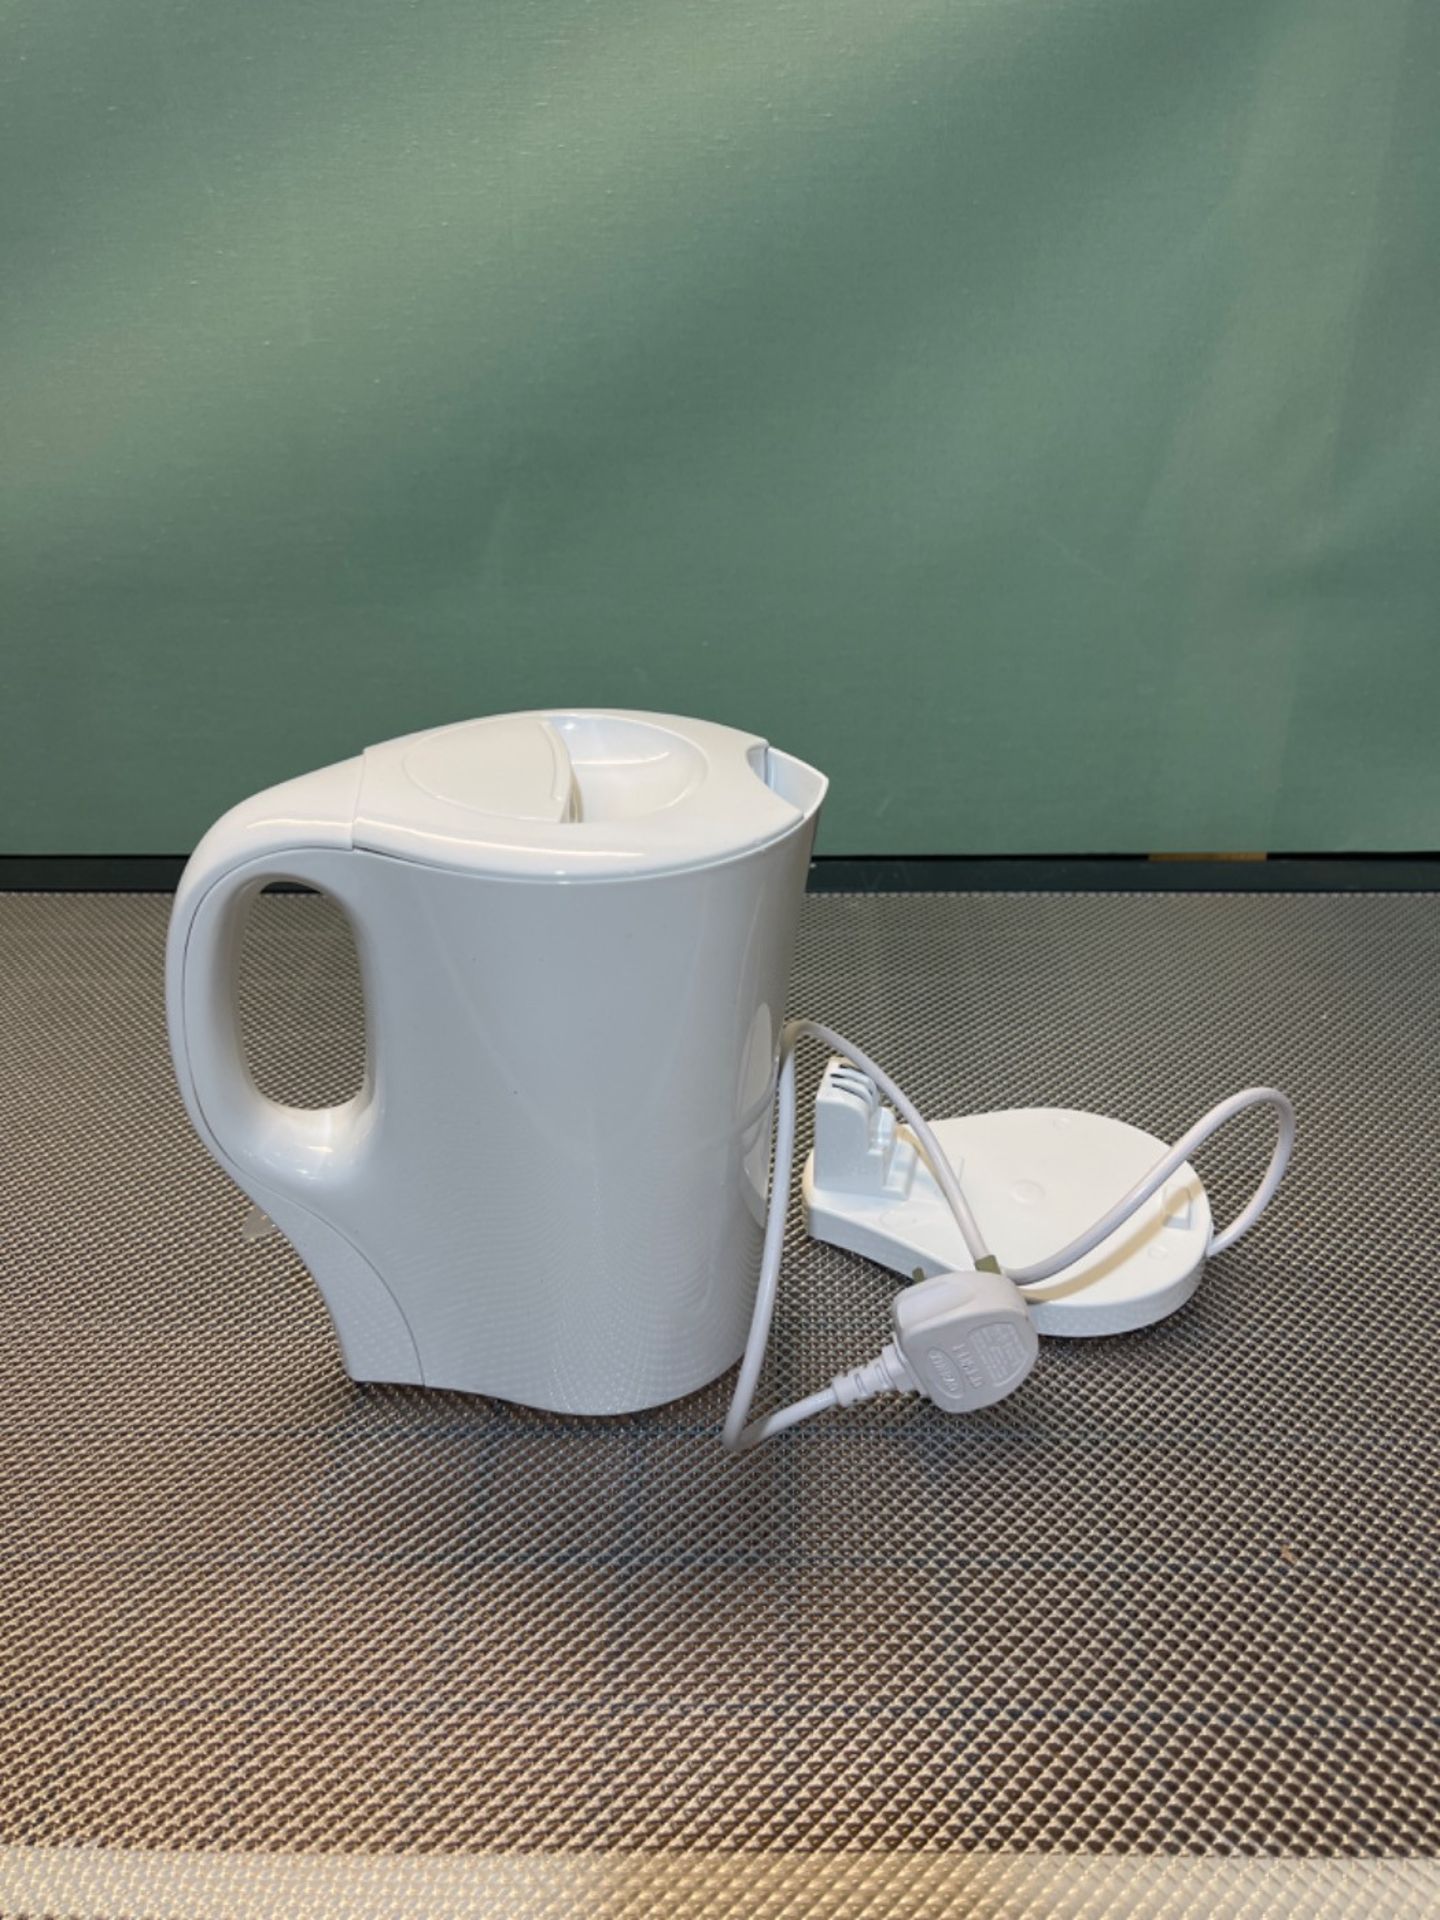 Daewoo Essentials, Plastic Kettle, White, 1.7 Litre Capacity, Fill 7 Cups, Family Size, Visible Wat - Image 2 of 3